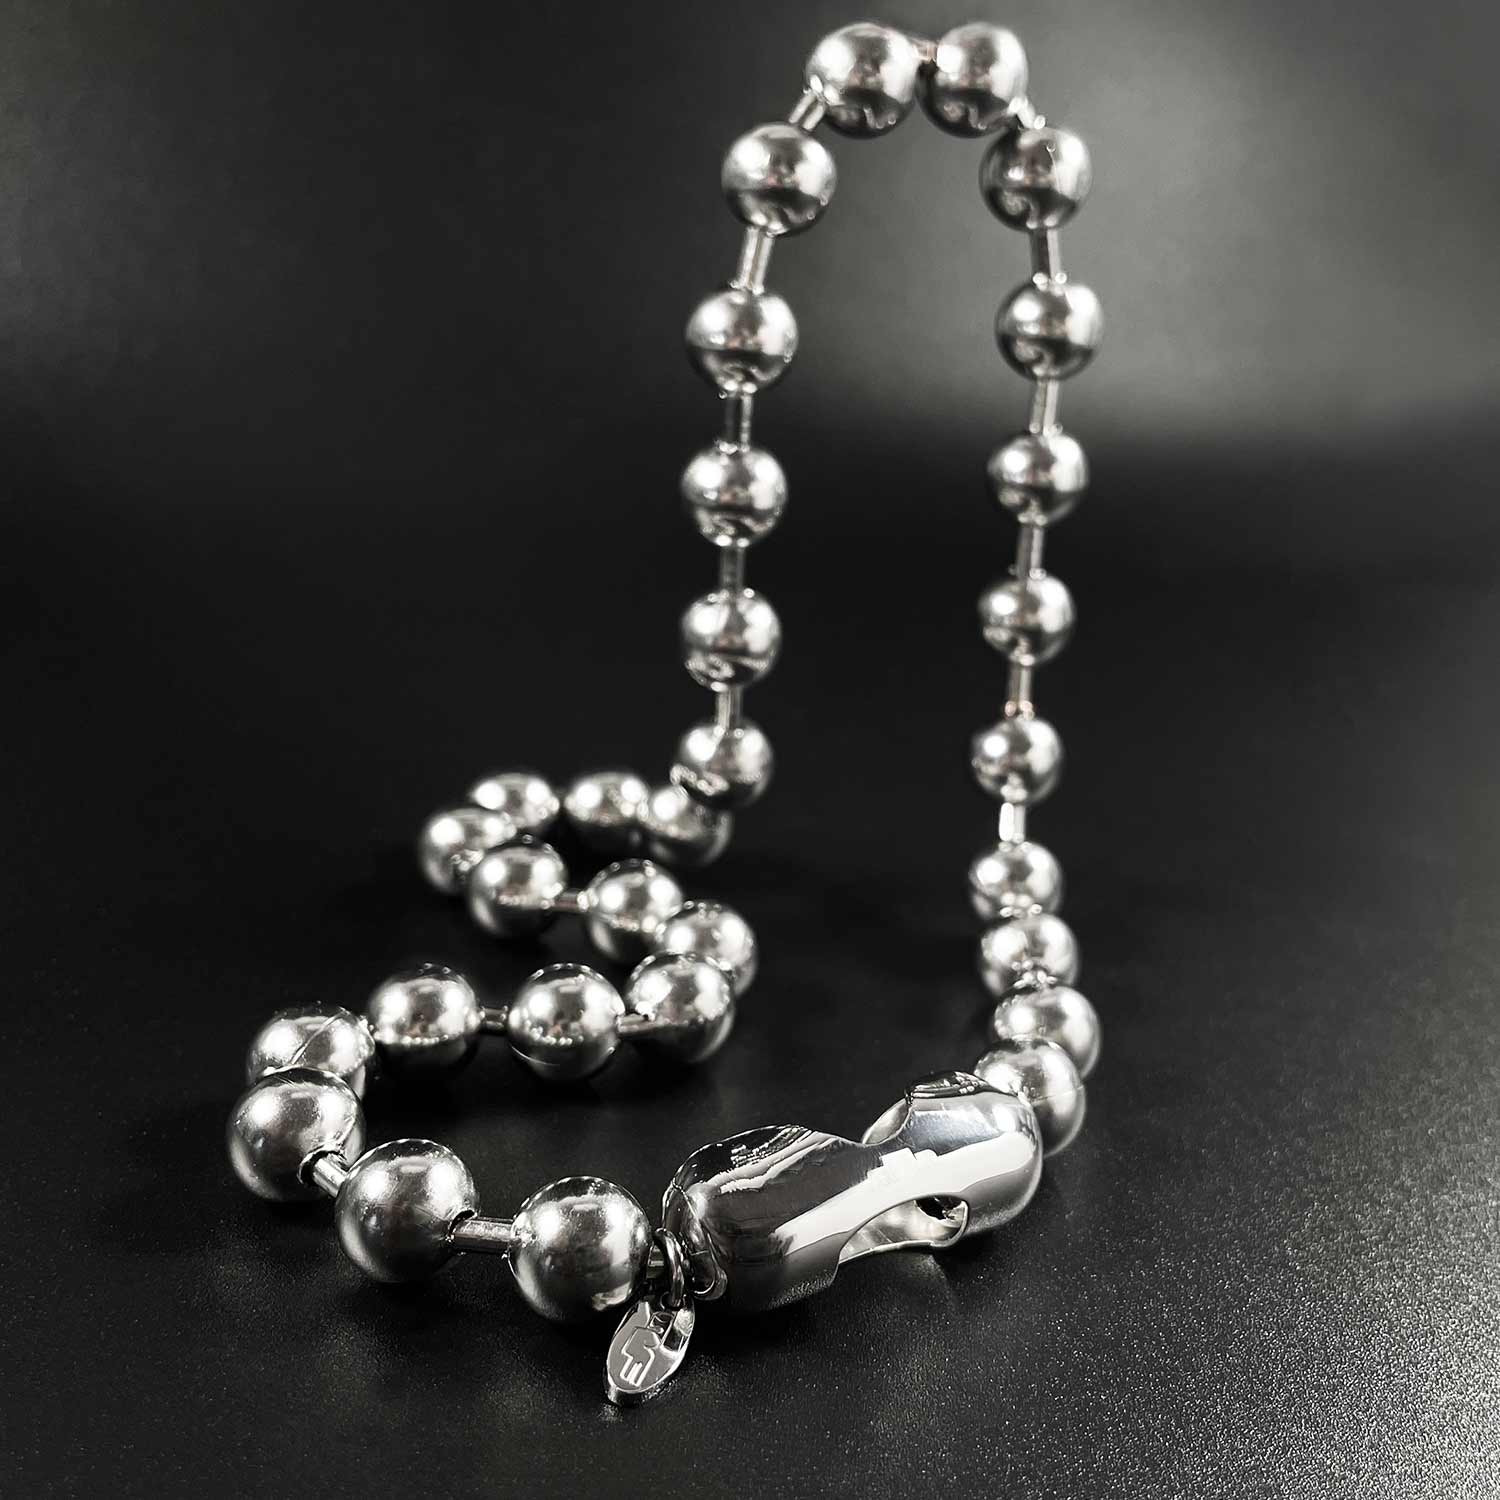 Big ol' ball chain solo - y2k style jewelry by Personal Fears